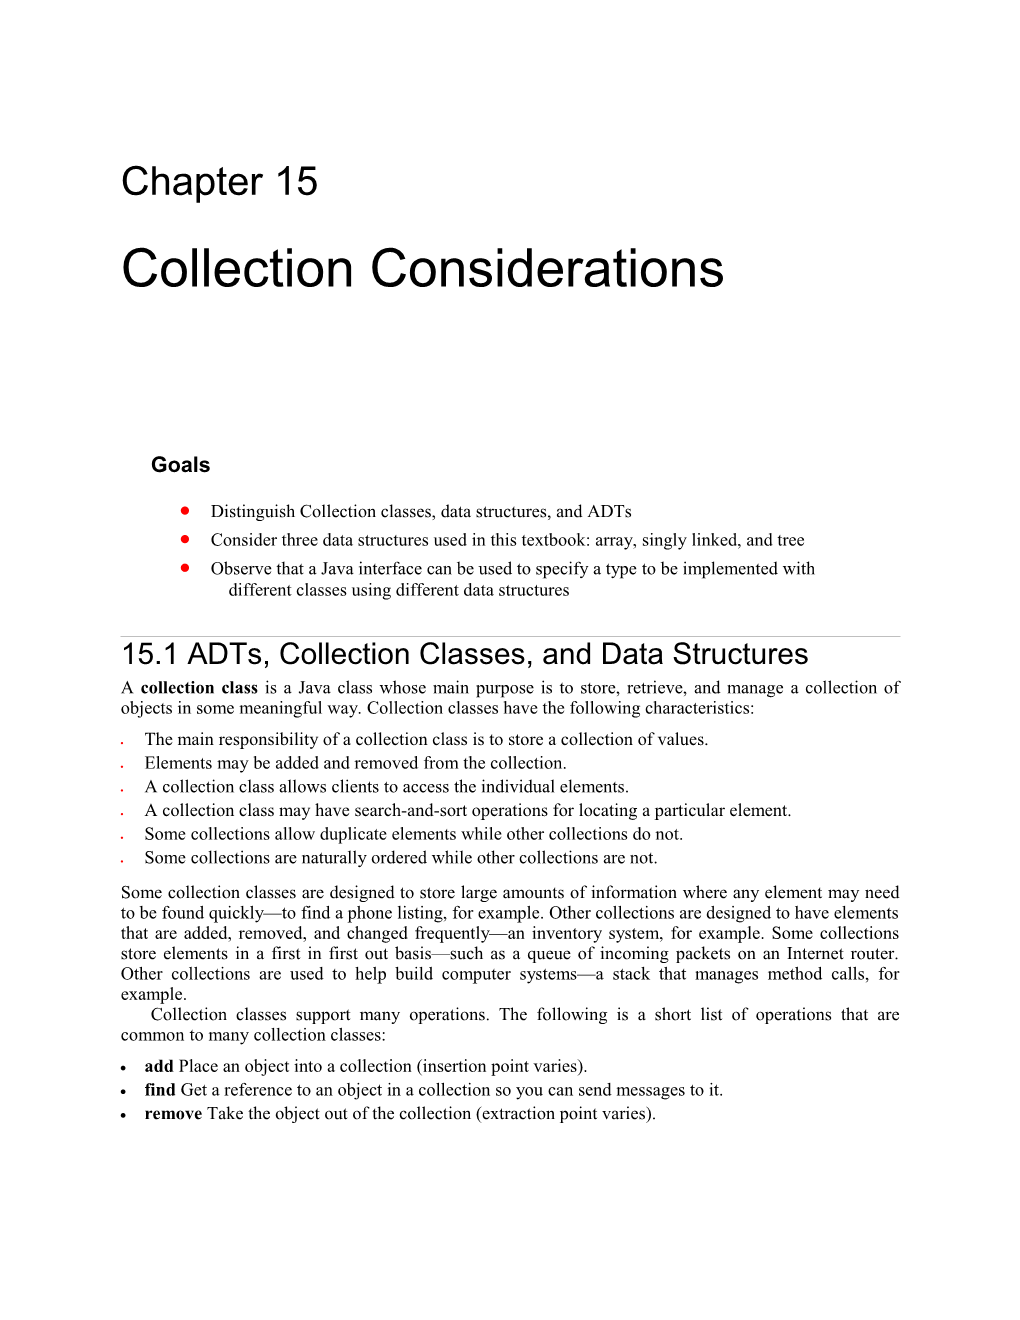 Collection Considerations